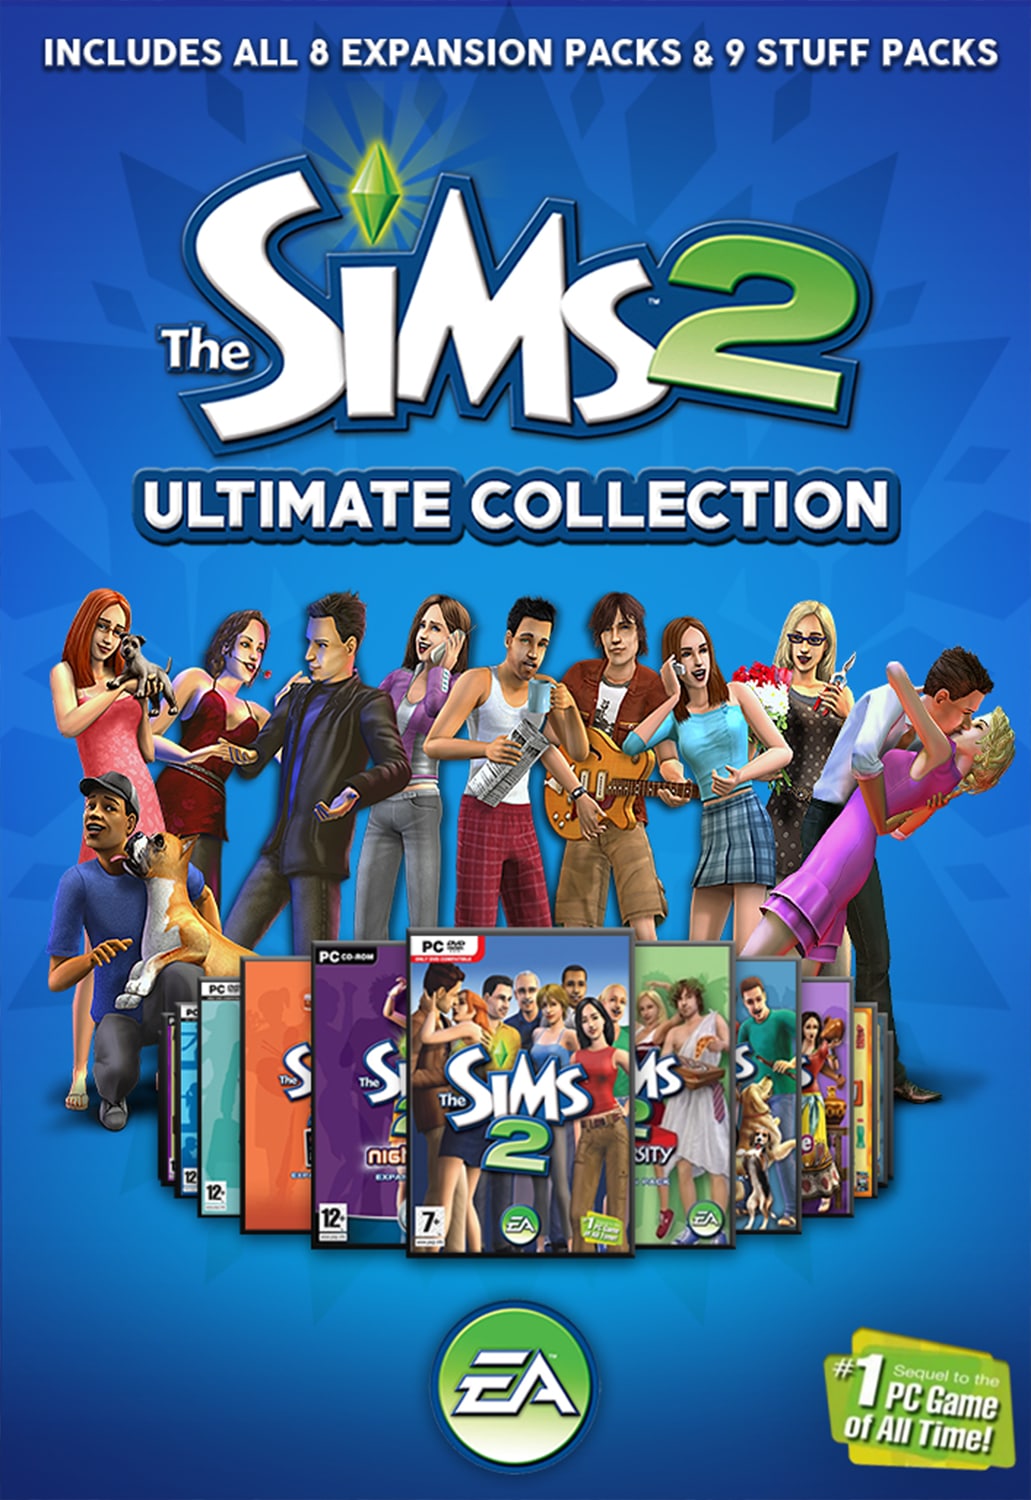 sims 4 expansions and stuff packs